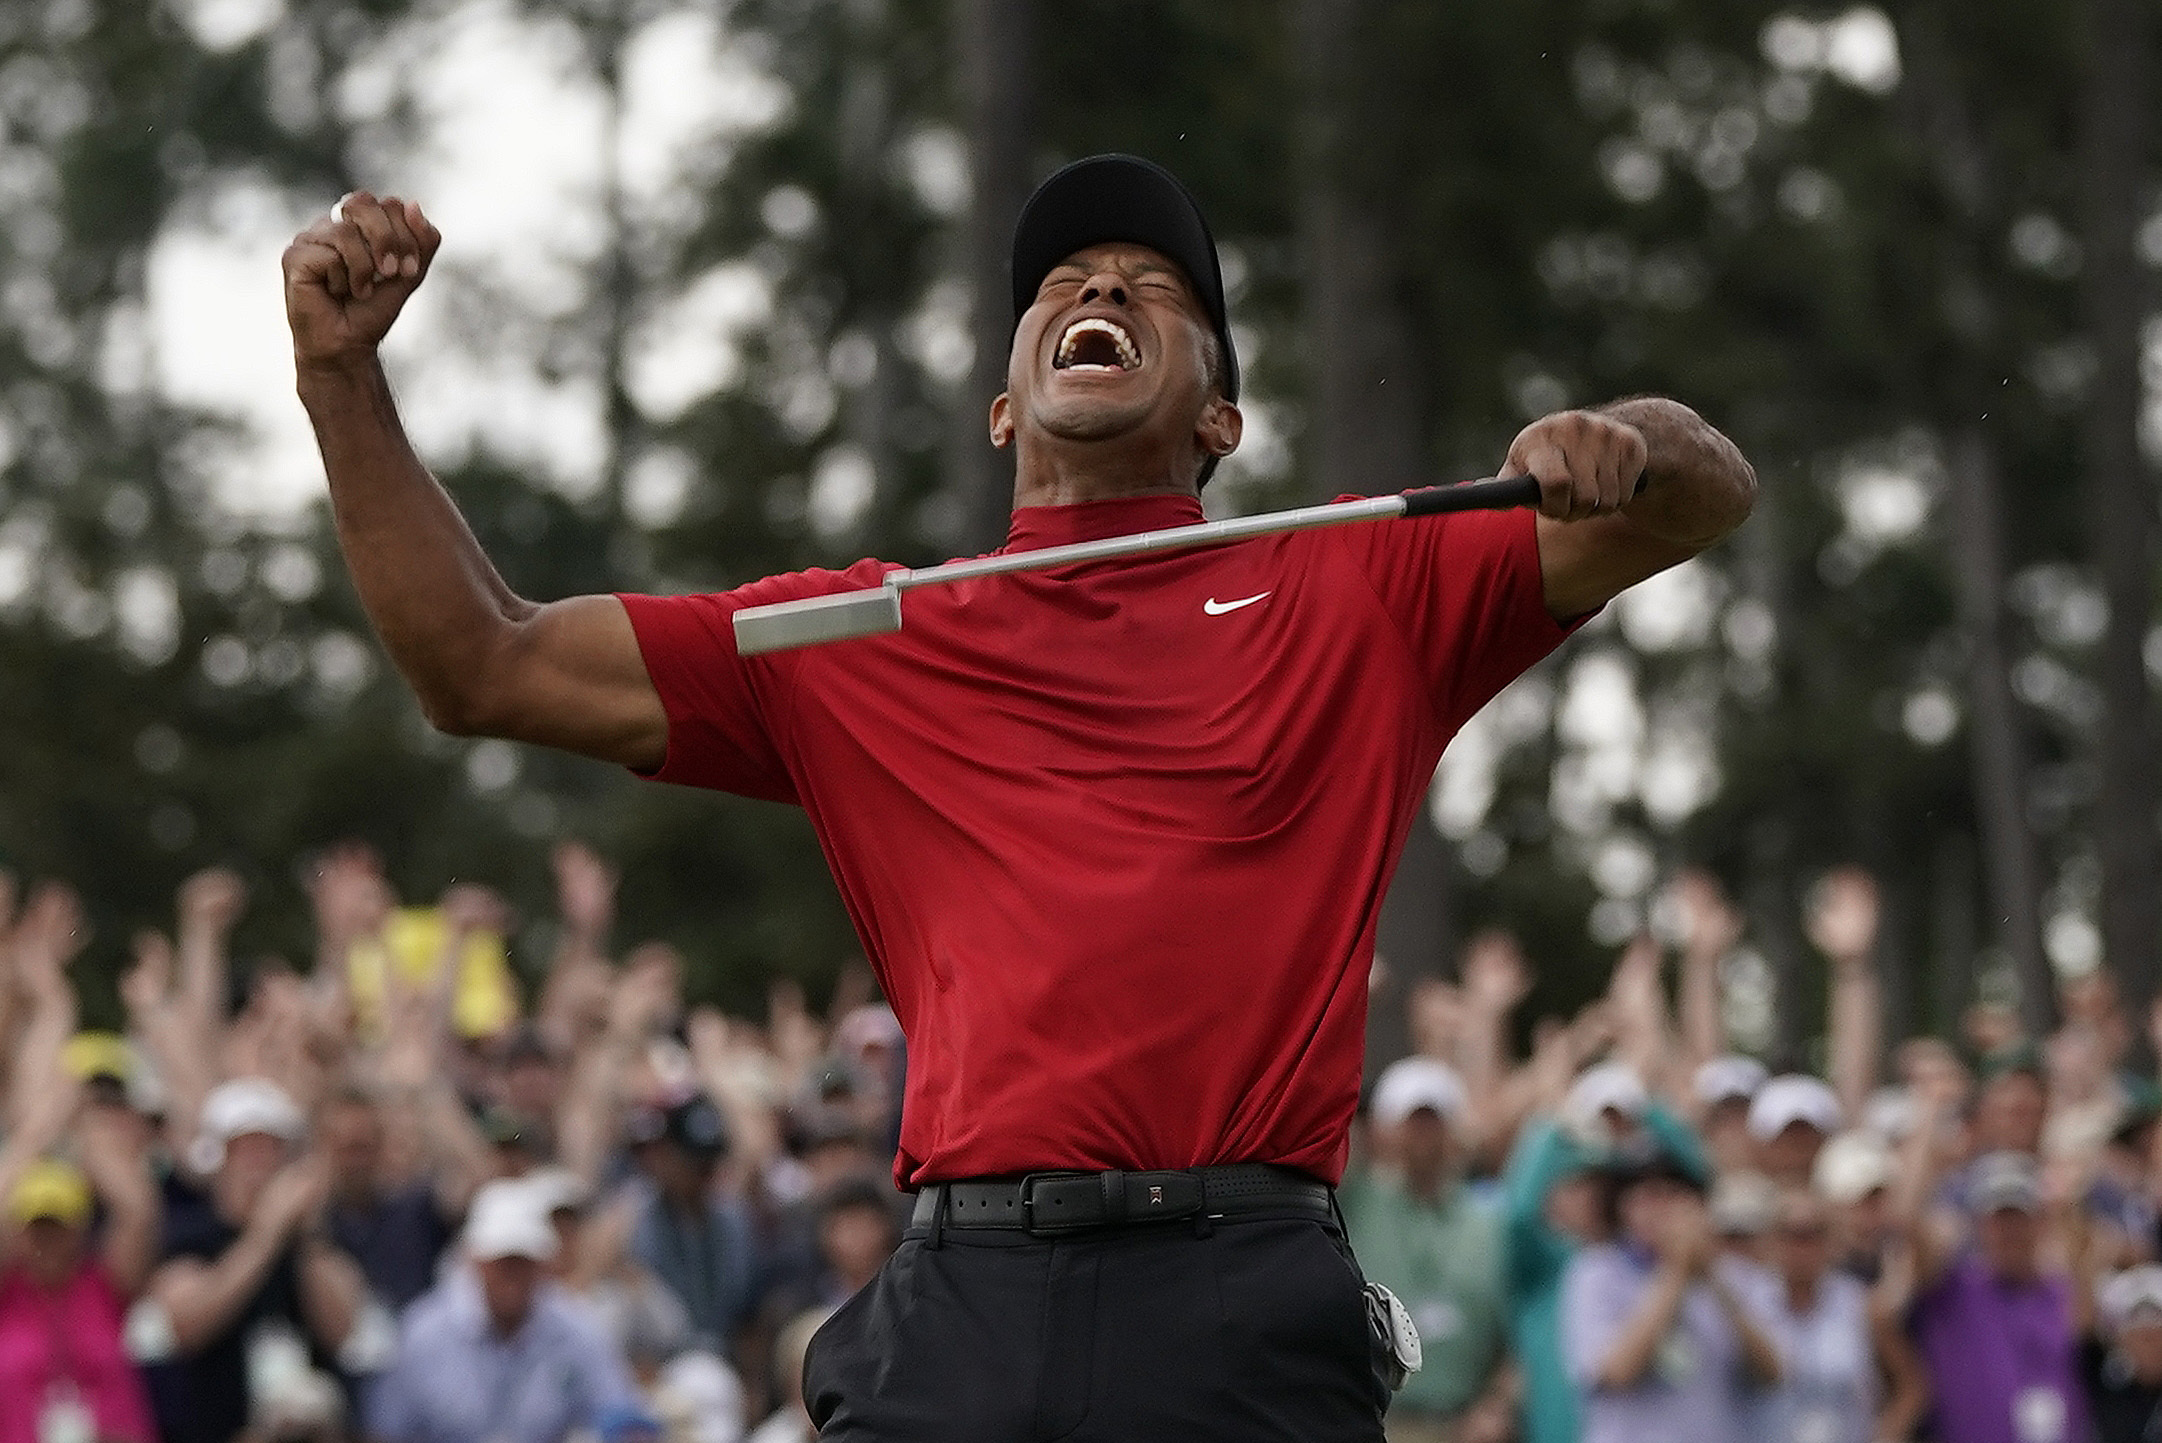 Tiger Woods was just part of the biggest group of celebrities to